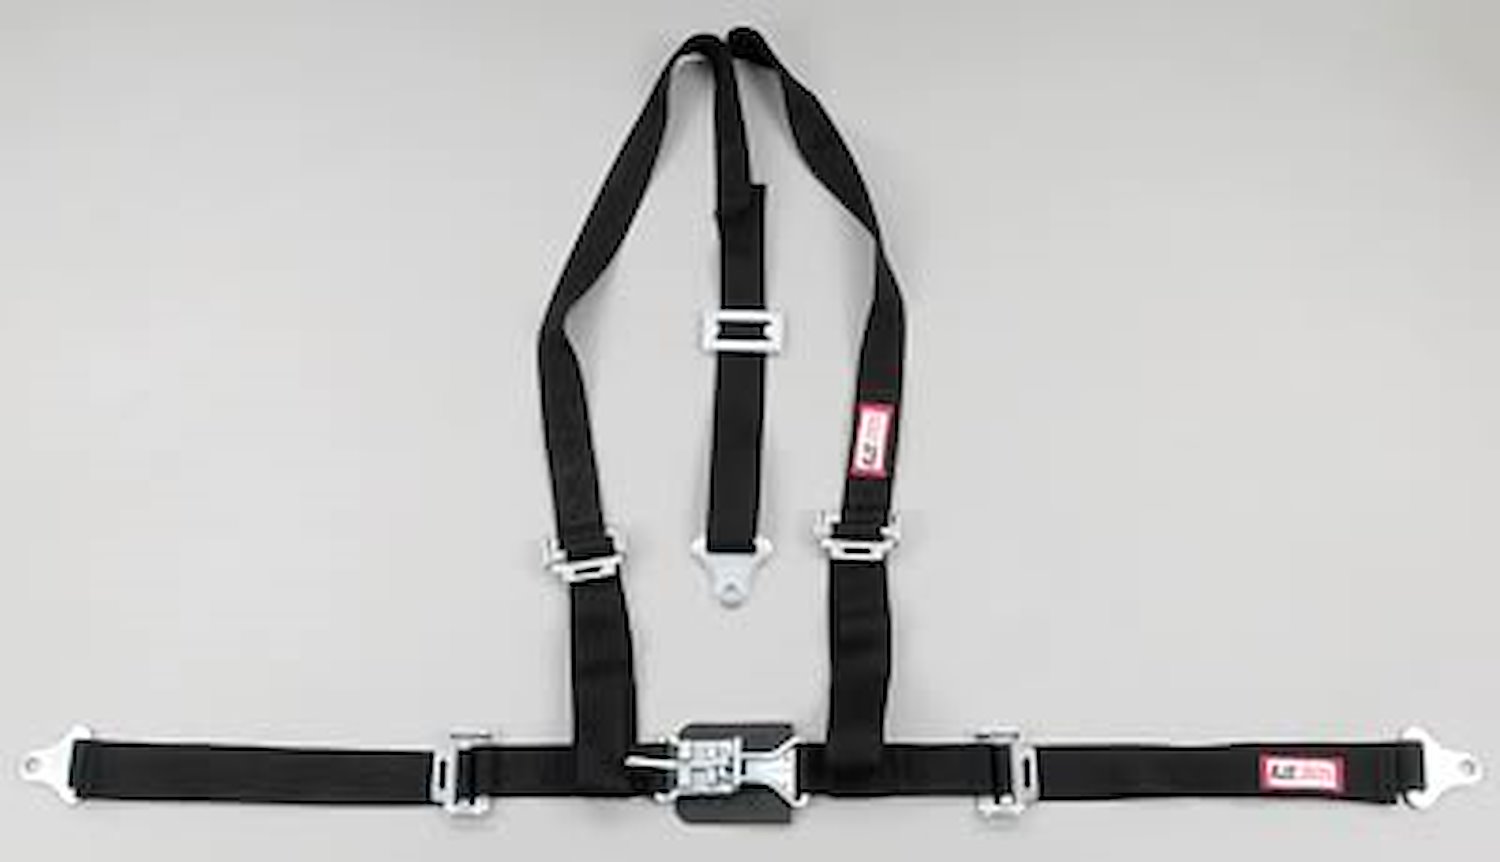 NON-SFI L&L HARNESS 2 PULL UP Lap Belt SNAP SEWN IN 2 S.H. Y FLOOR Mount WRAP/SNAP GRAY